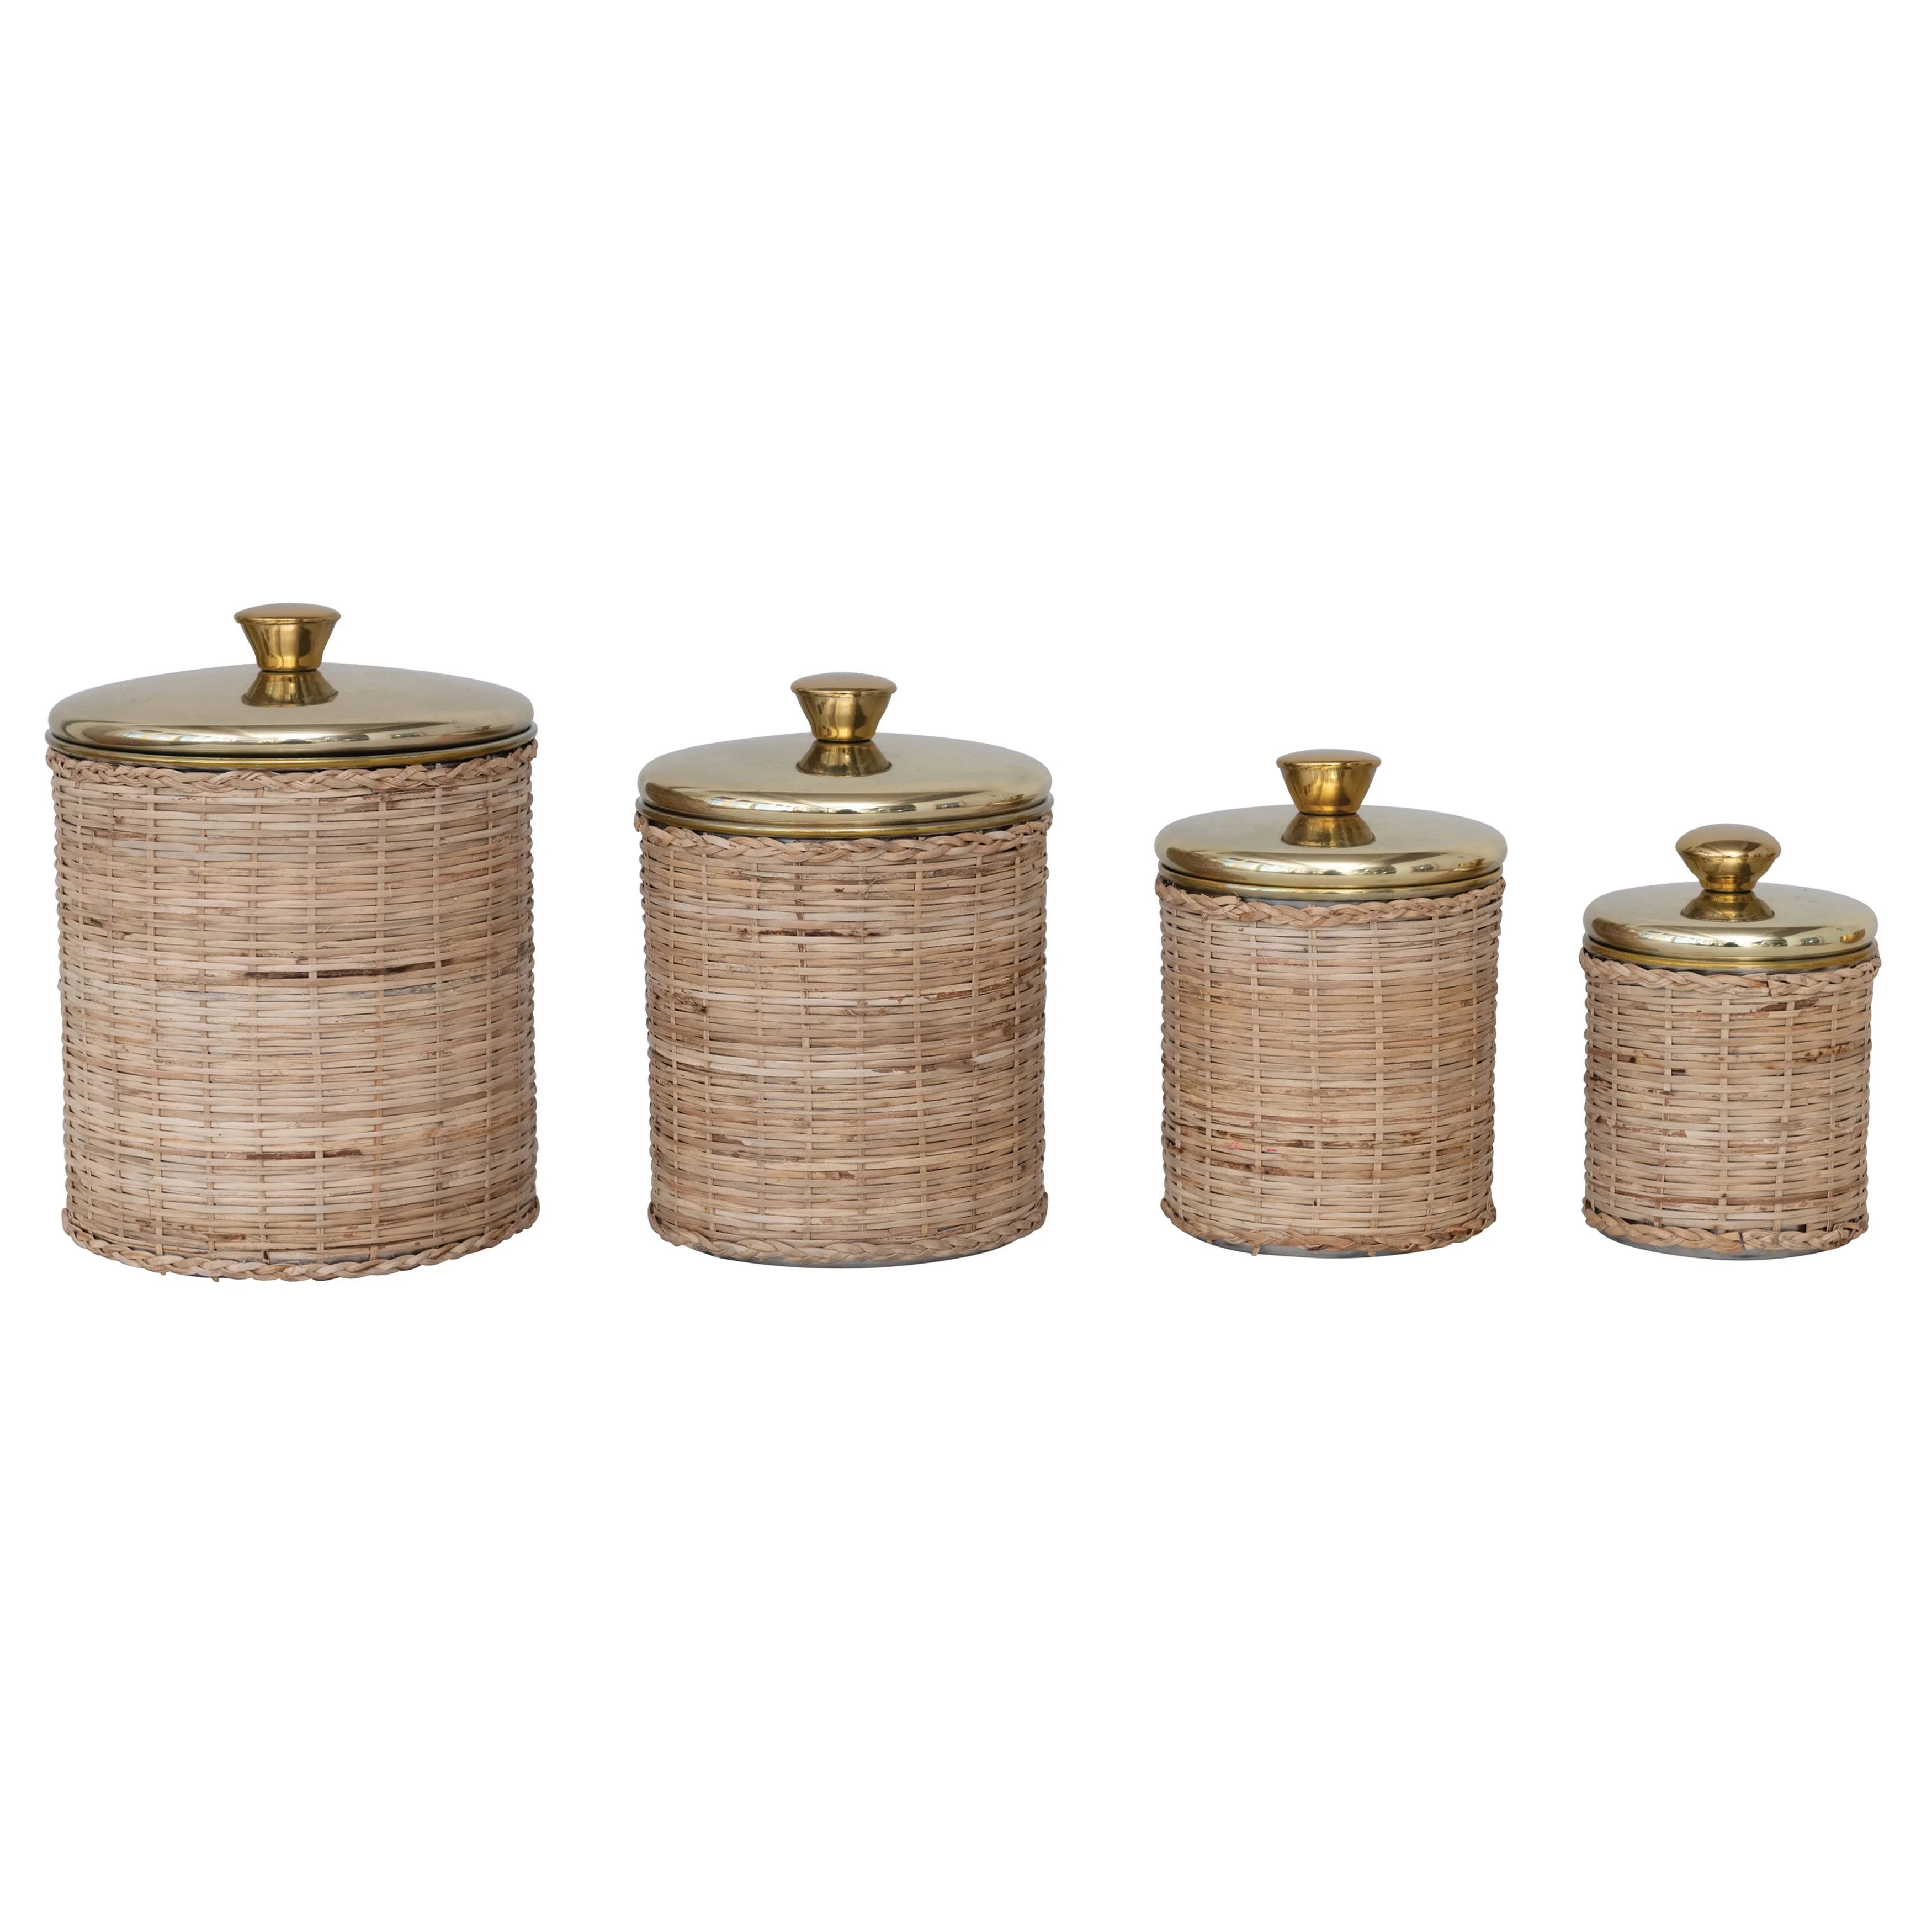 Creative Co-Op Rattan Wrapped Stainless Steel Canisters, Set of 4, Brass Finish | Walmart (US)